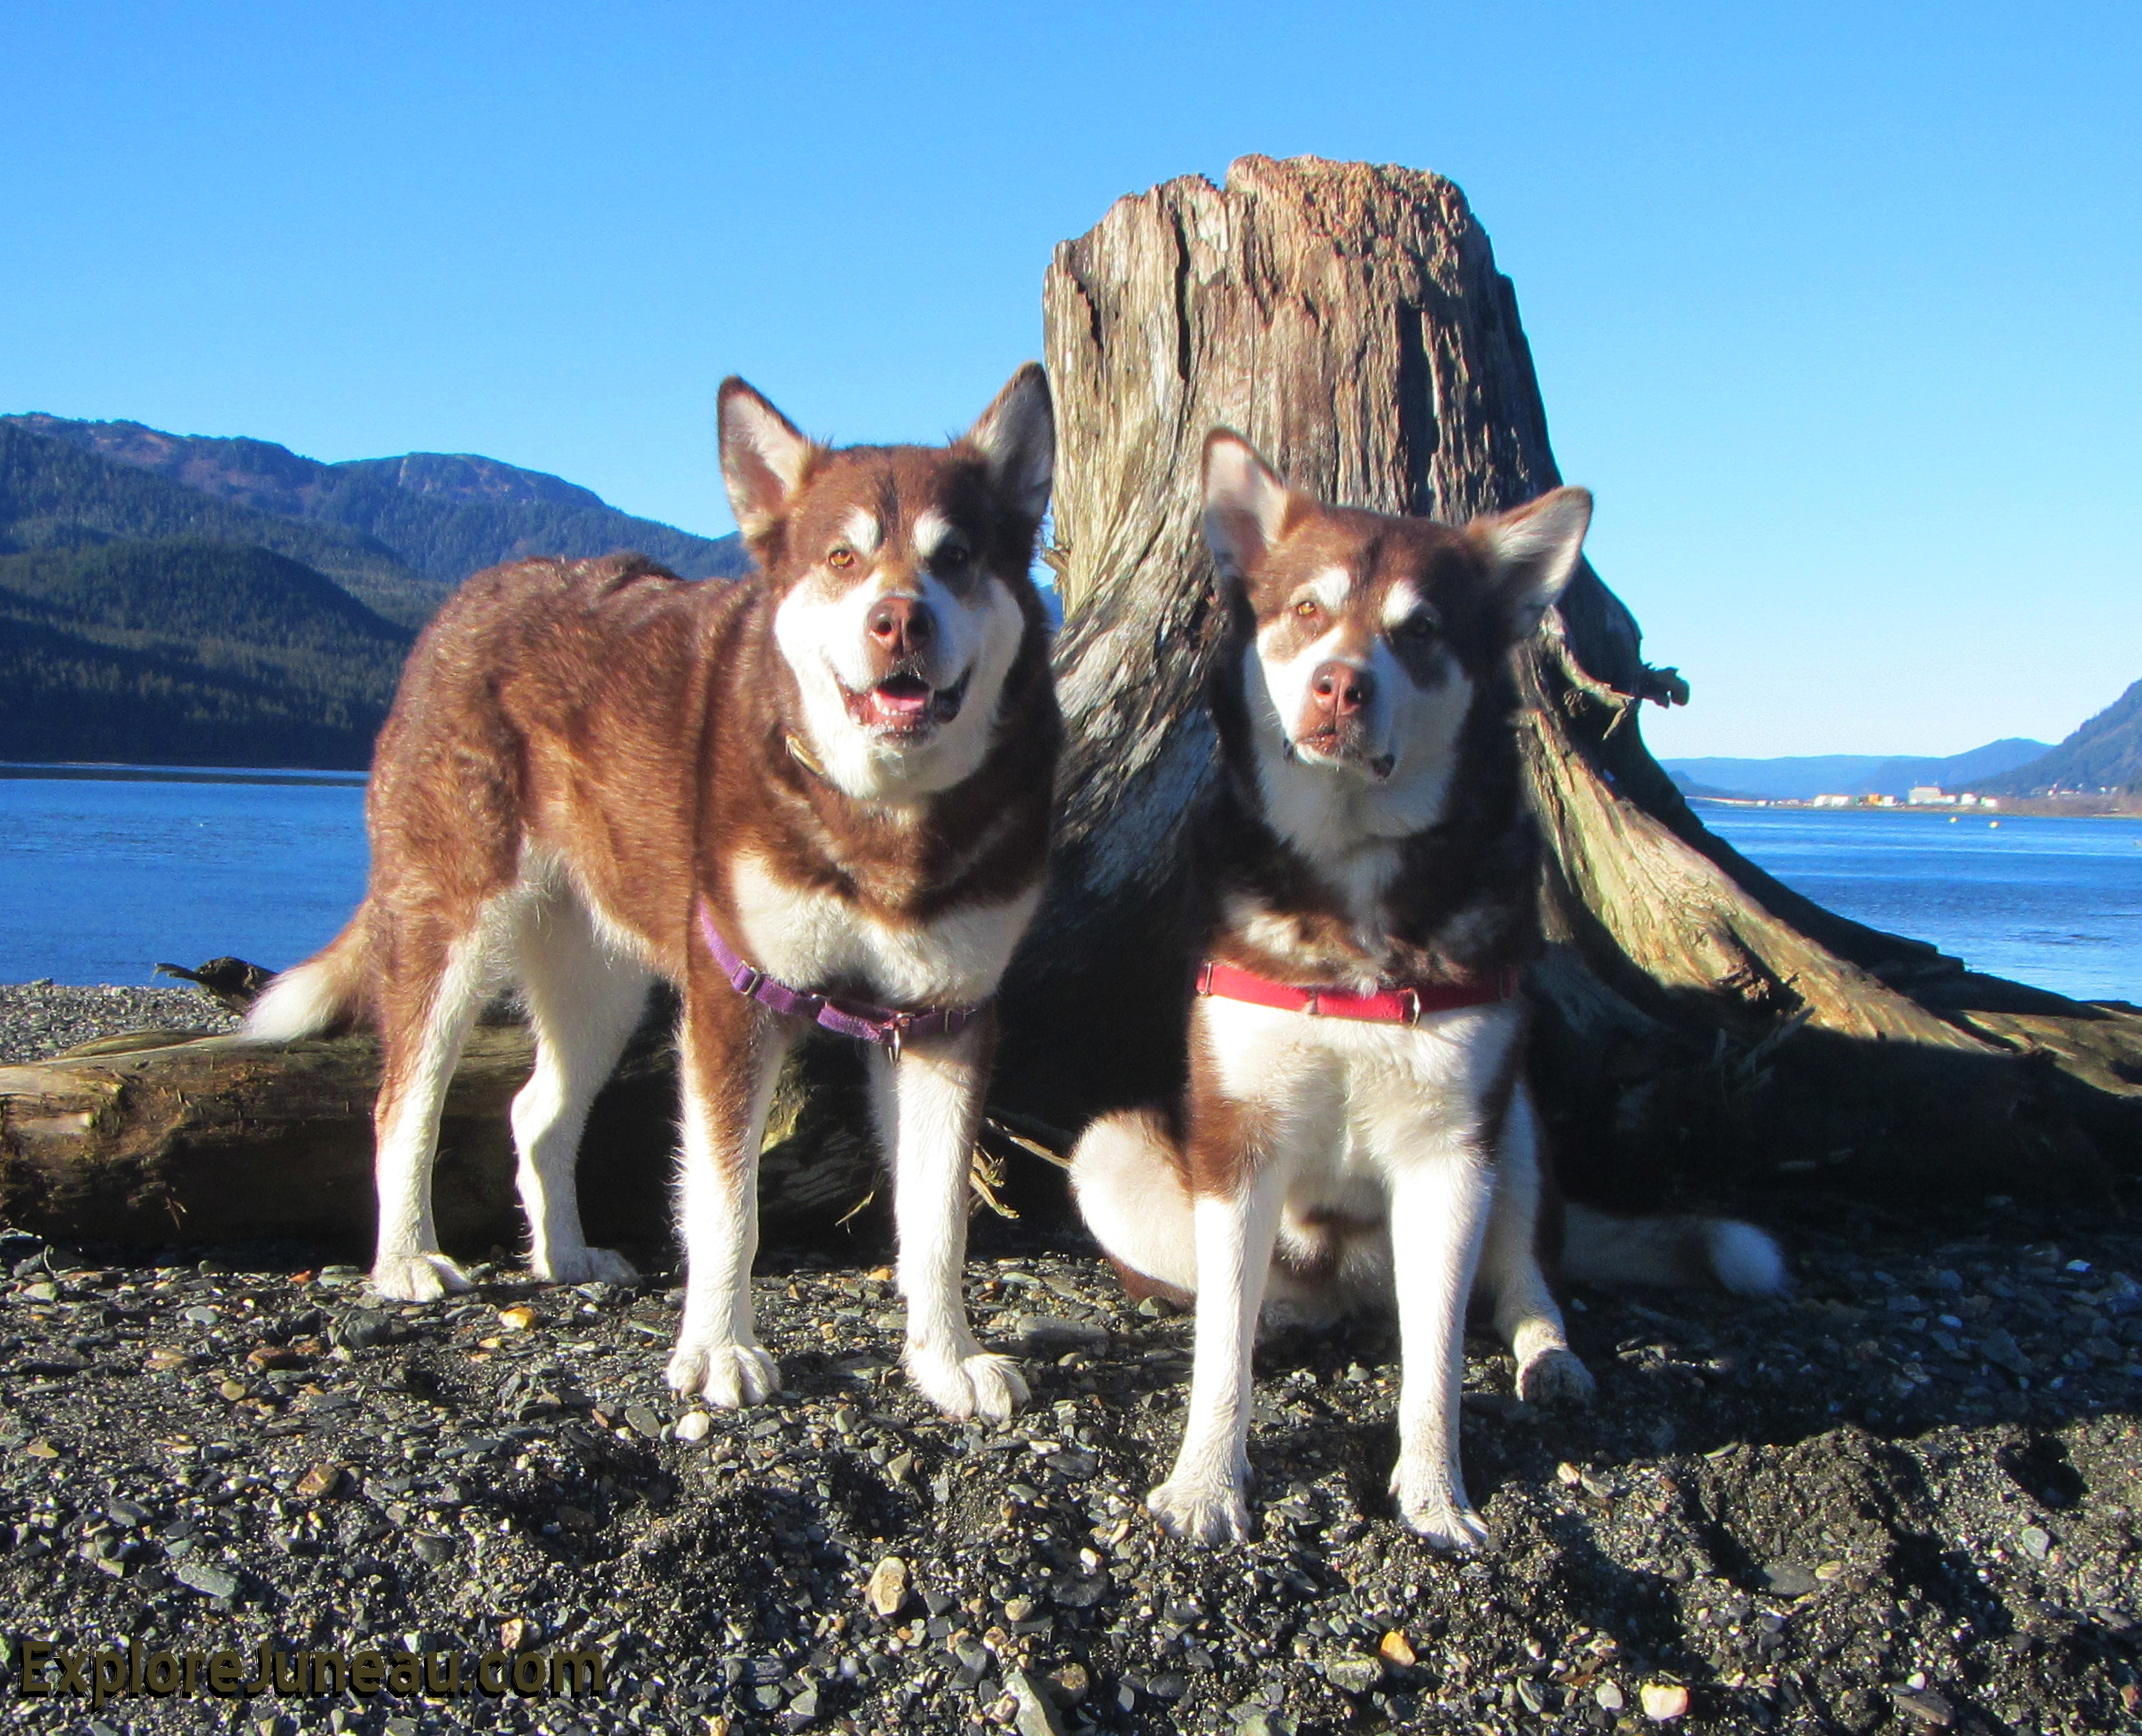 Skadi & Freya - Juneau Alaska. Thank you for your Kindness and Support! Please click 